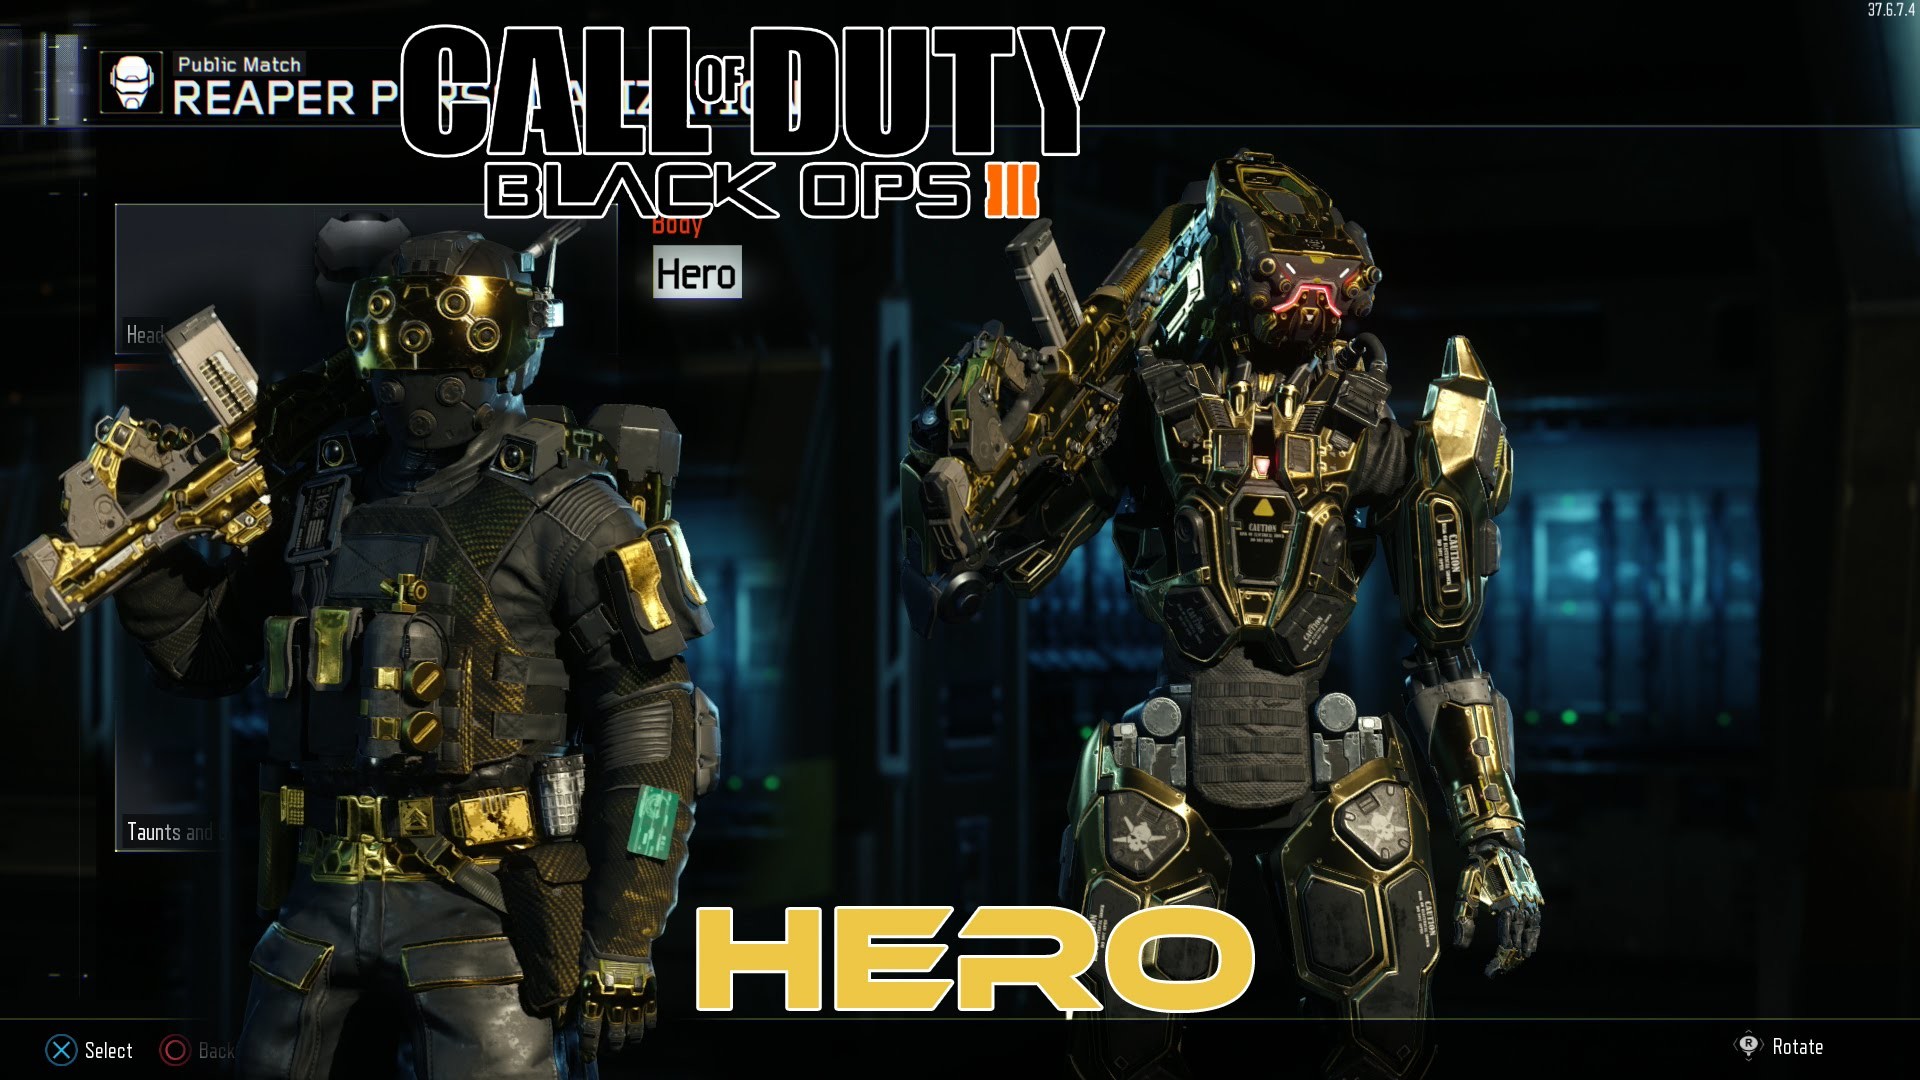 1920x1080 BLACK OPS 3 Reaper And FireBreak Specialists With Hero Body/Head